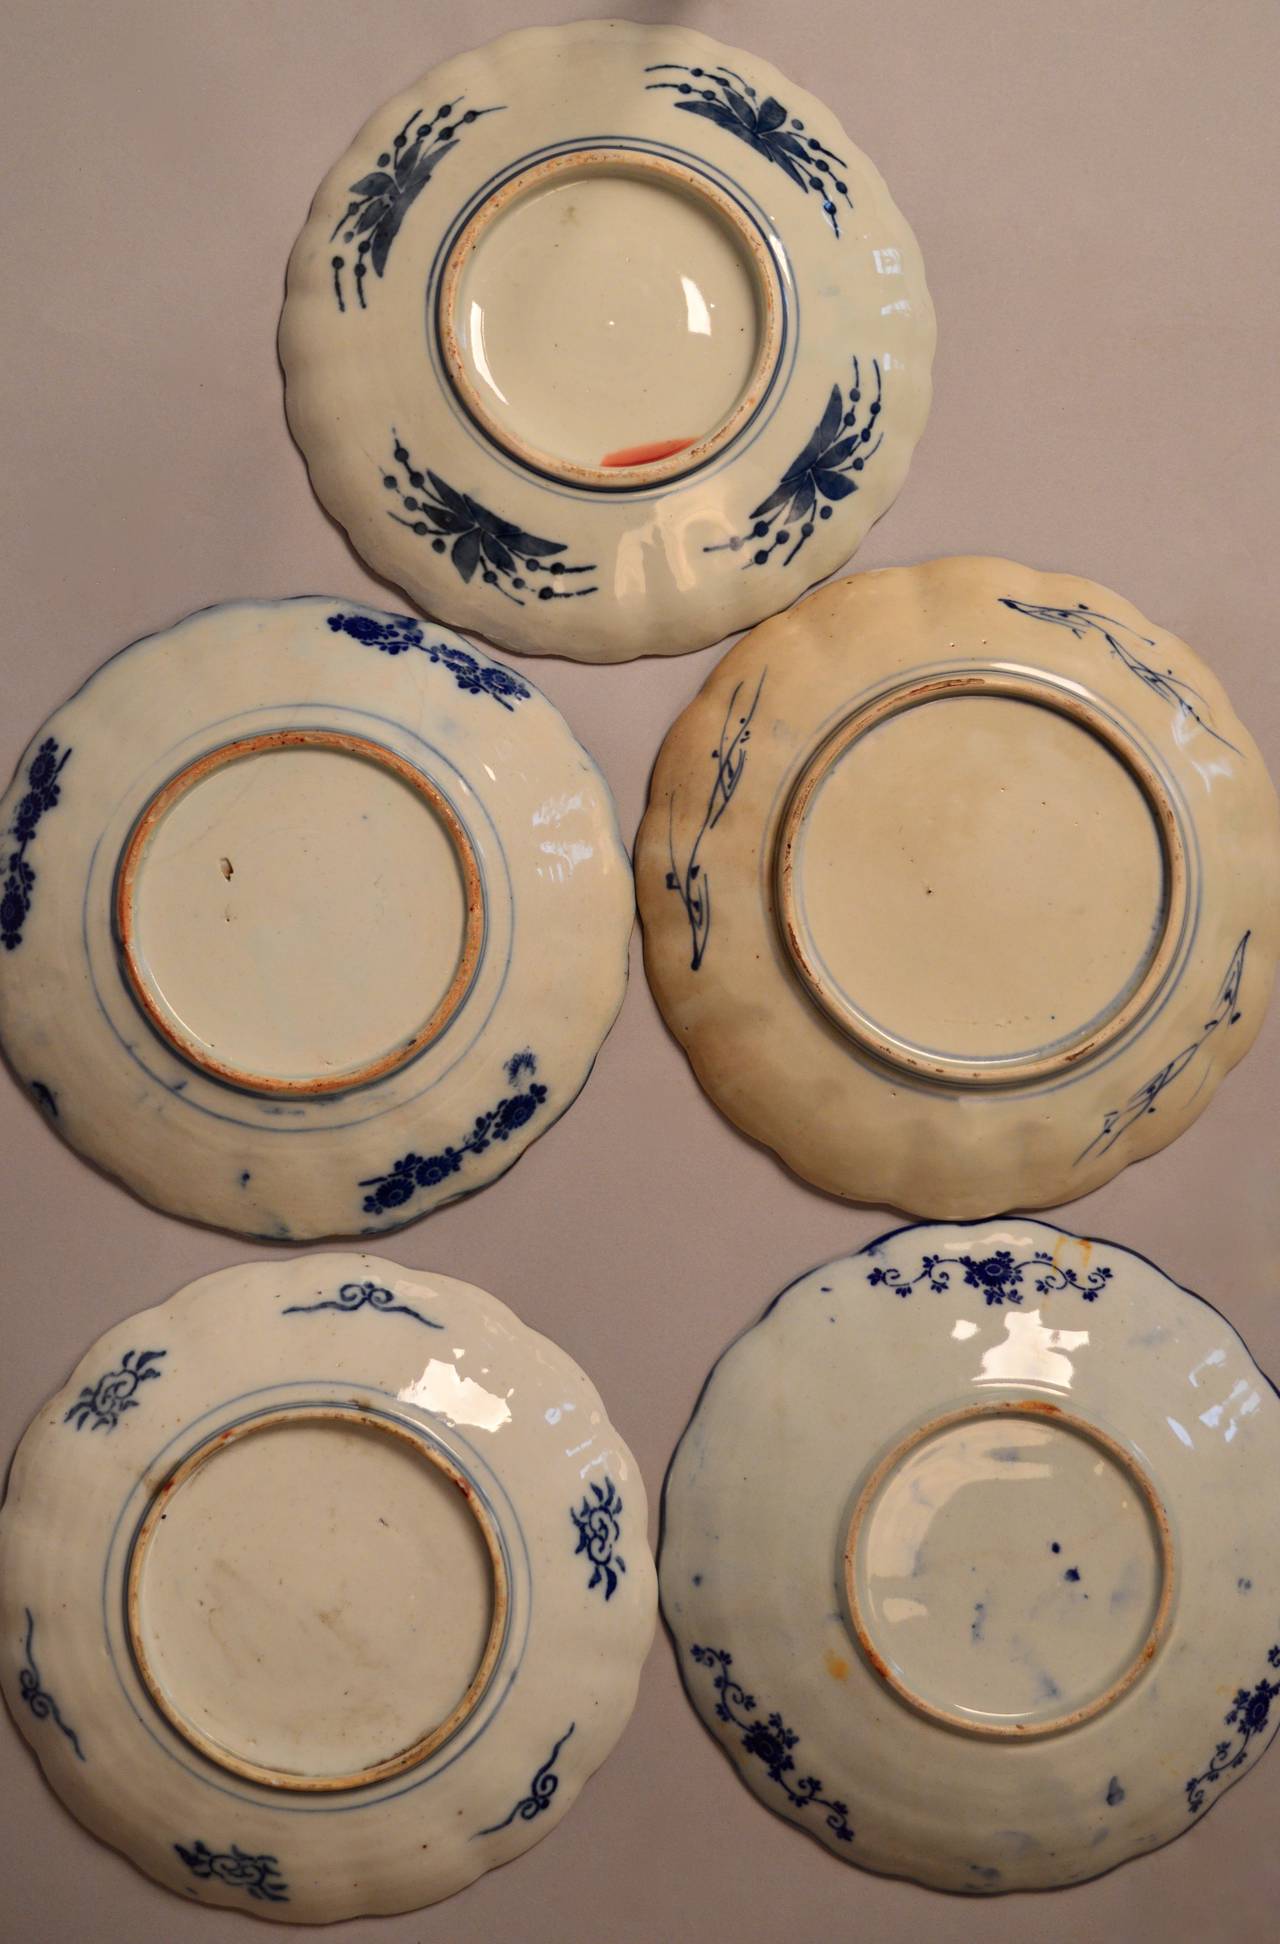 A collection of five 19th century Imari scalloped edge plates from the Meiji period. Central urn design with field glazed in the traditional orange, blue green and white.